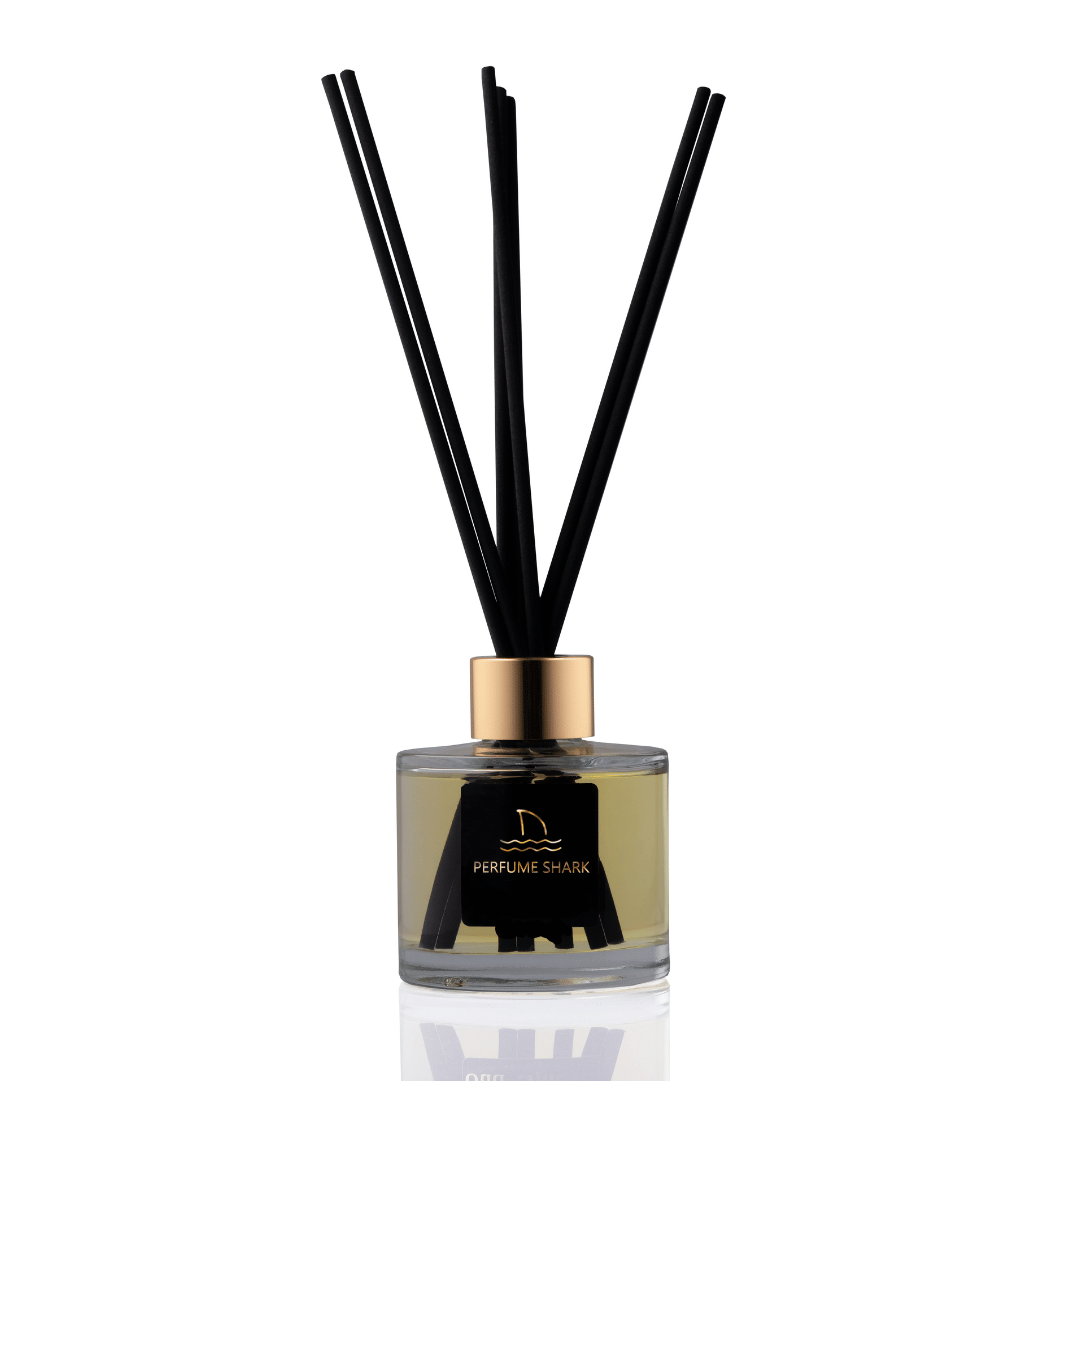 Picturesque - With Similar Fragrant Notes to Aqua Di Parma Colonia Leather